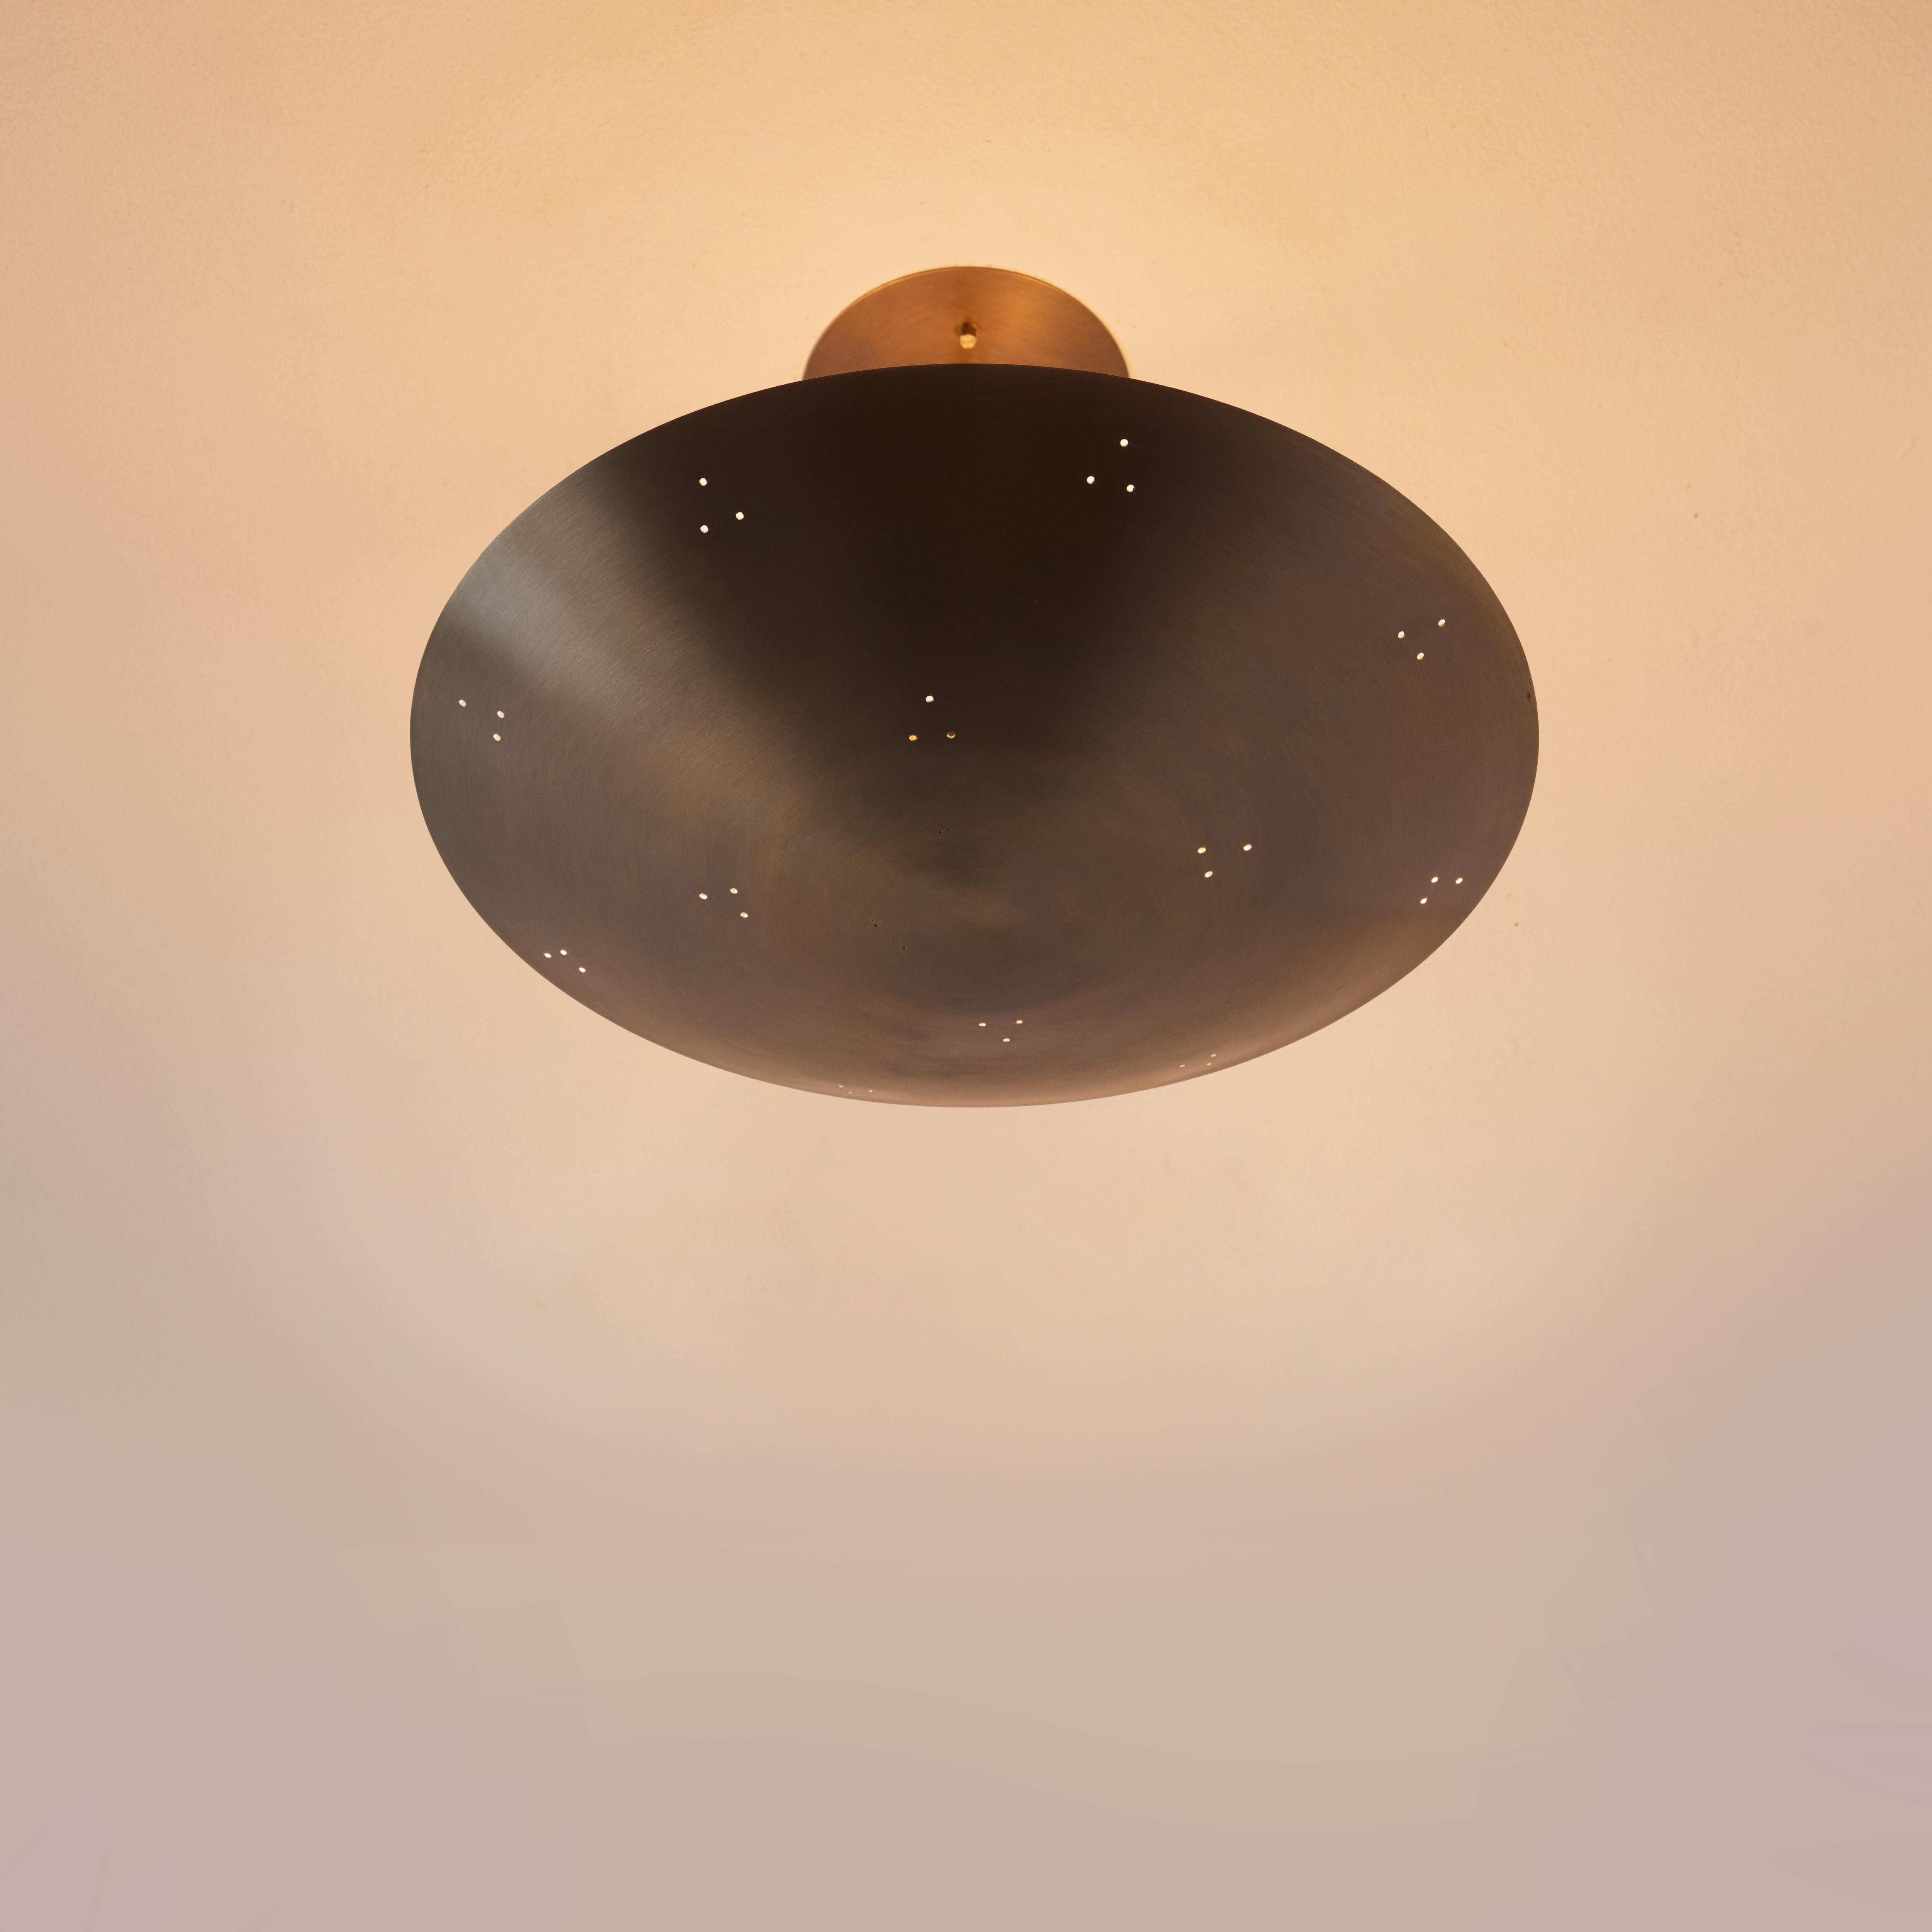 Two Enlighten 'Rey 14' Perforated Patinated Brass Dome Ceiling Lamp.

Hand-fabricated in Los Angeles, these highly refined ceiling lamps are reminiscent of the iconic mid-century Finnish designs of Paavo Tynell and Lisa Johansson Pape. Executed in